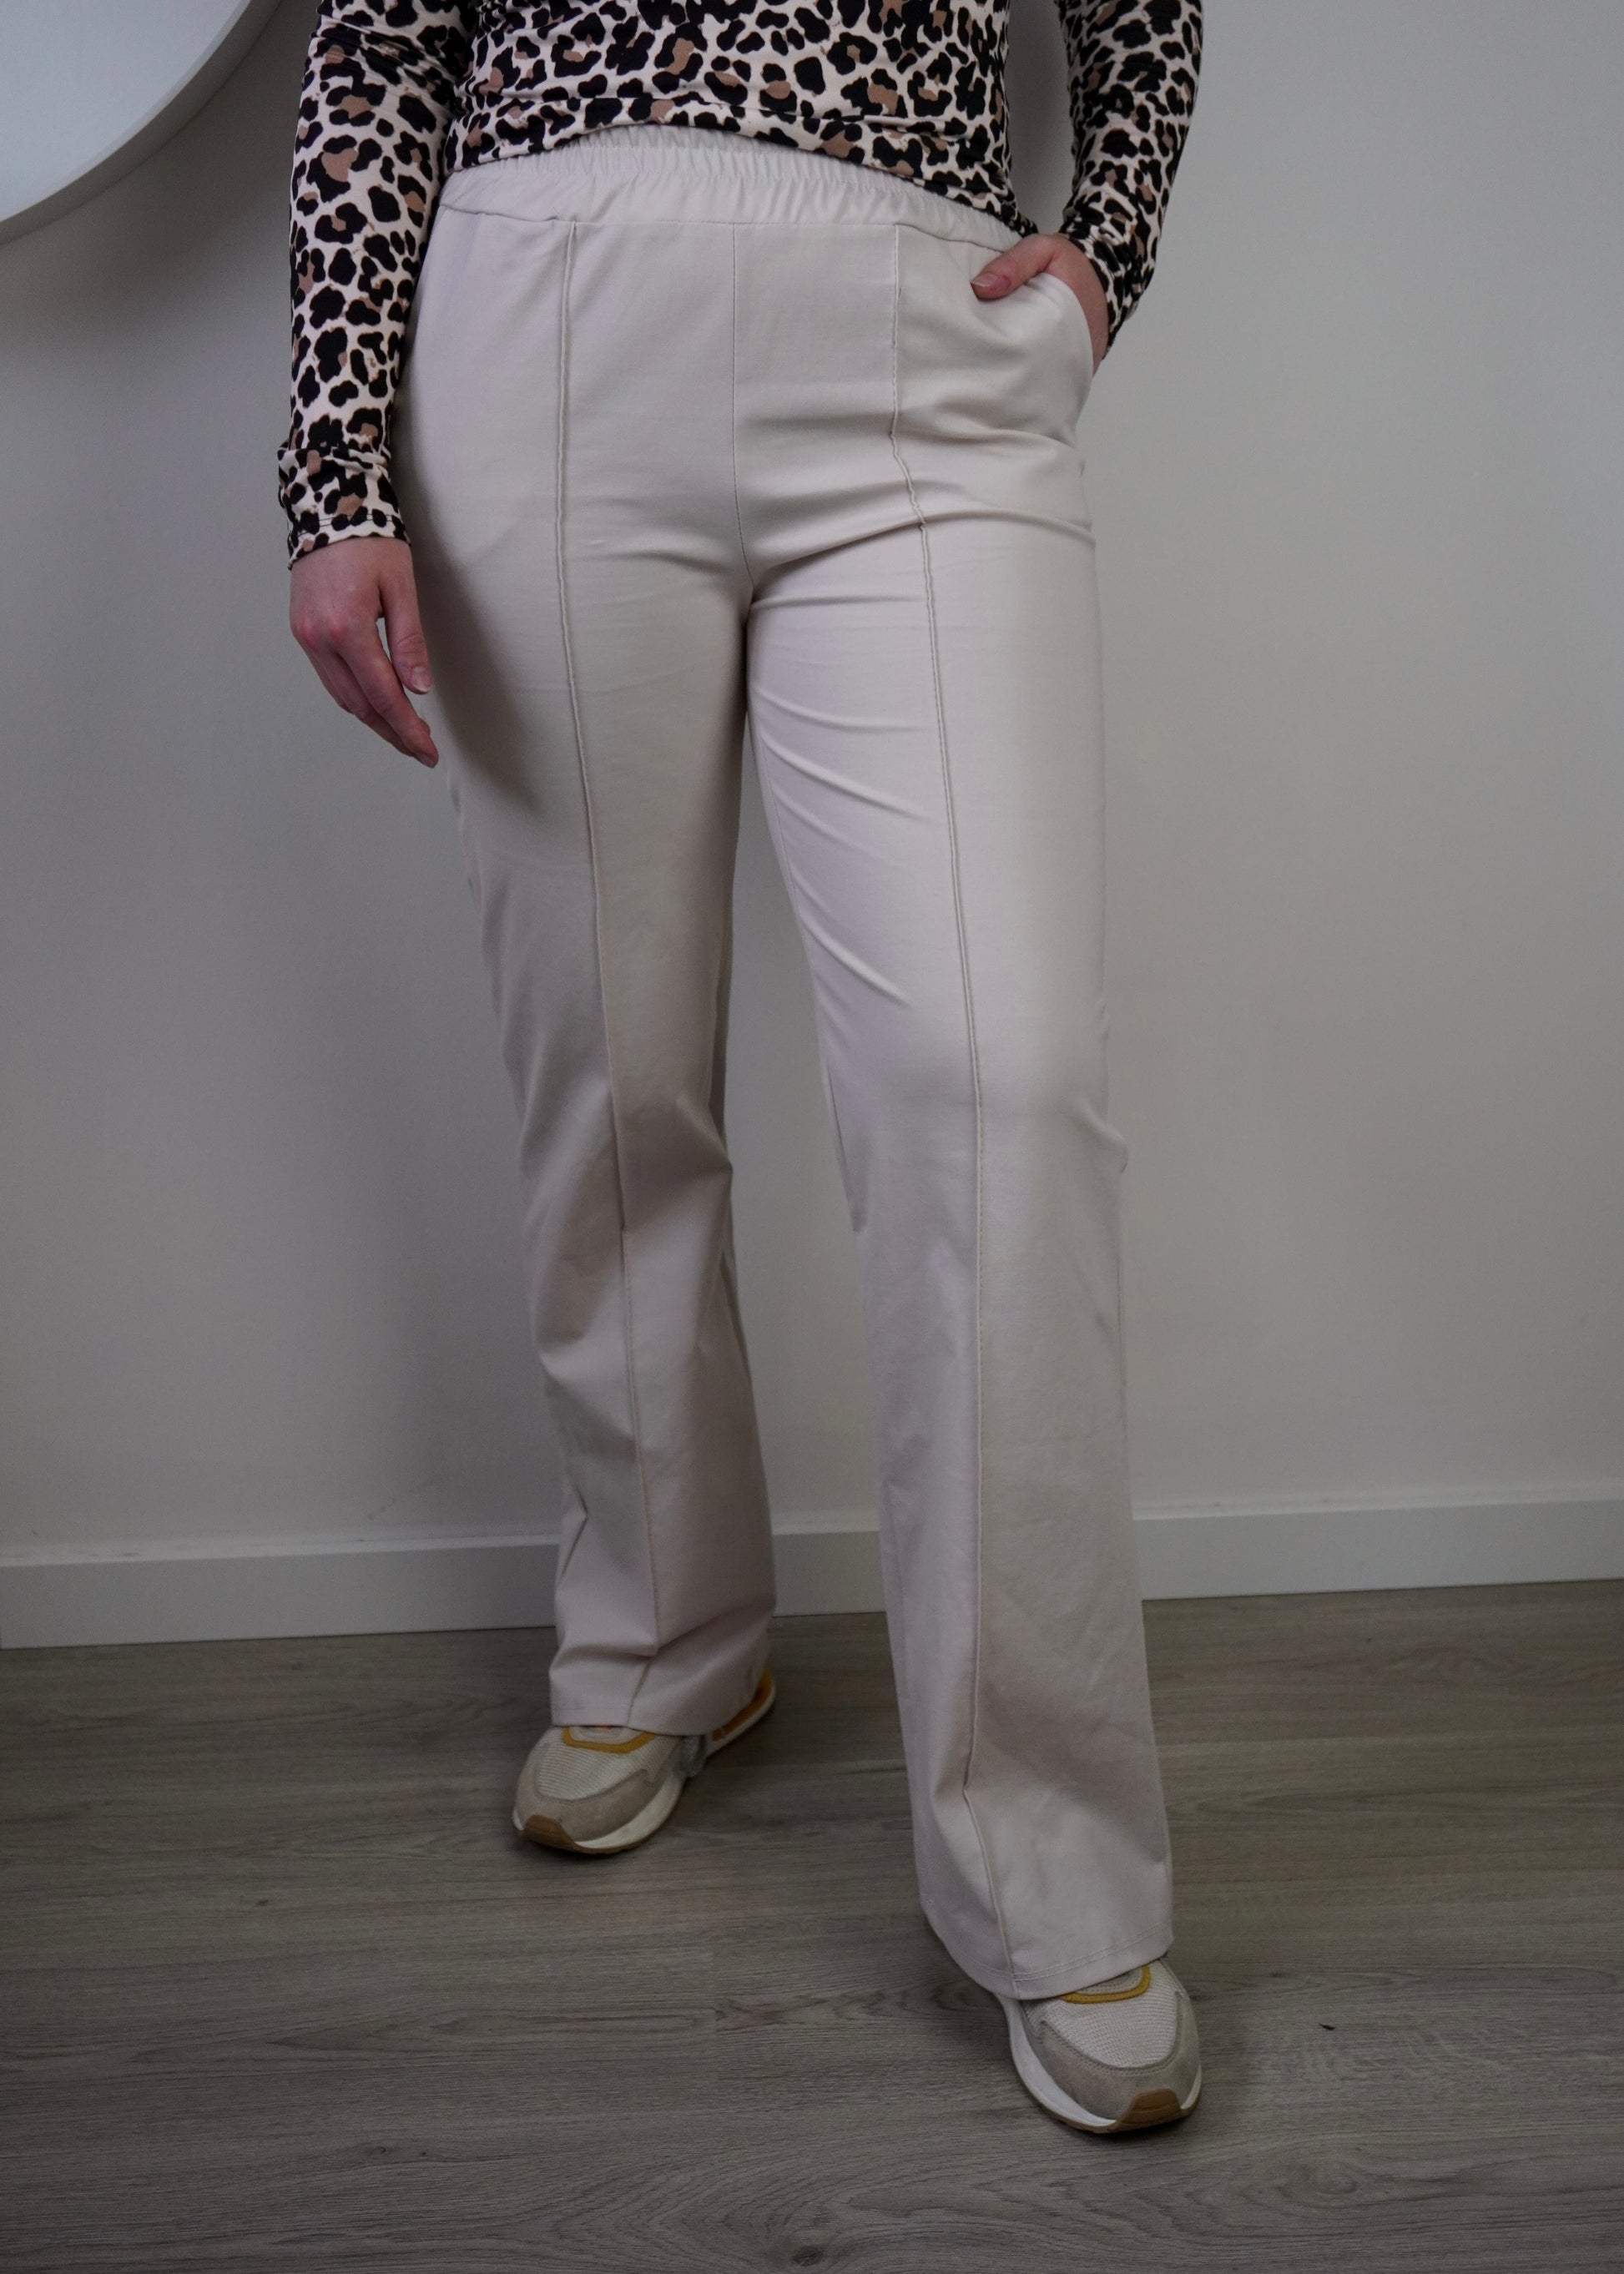 comfy pantalon beige | Styles And More